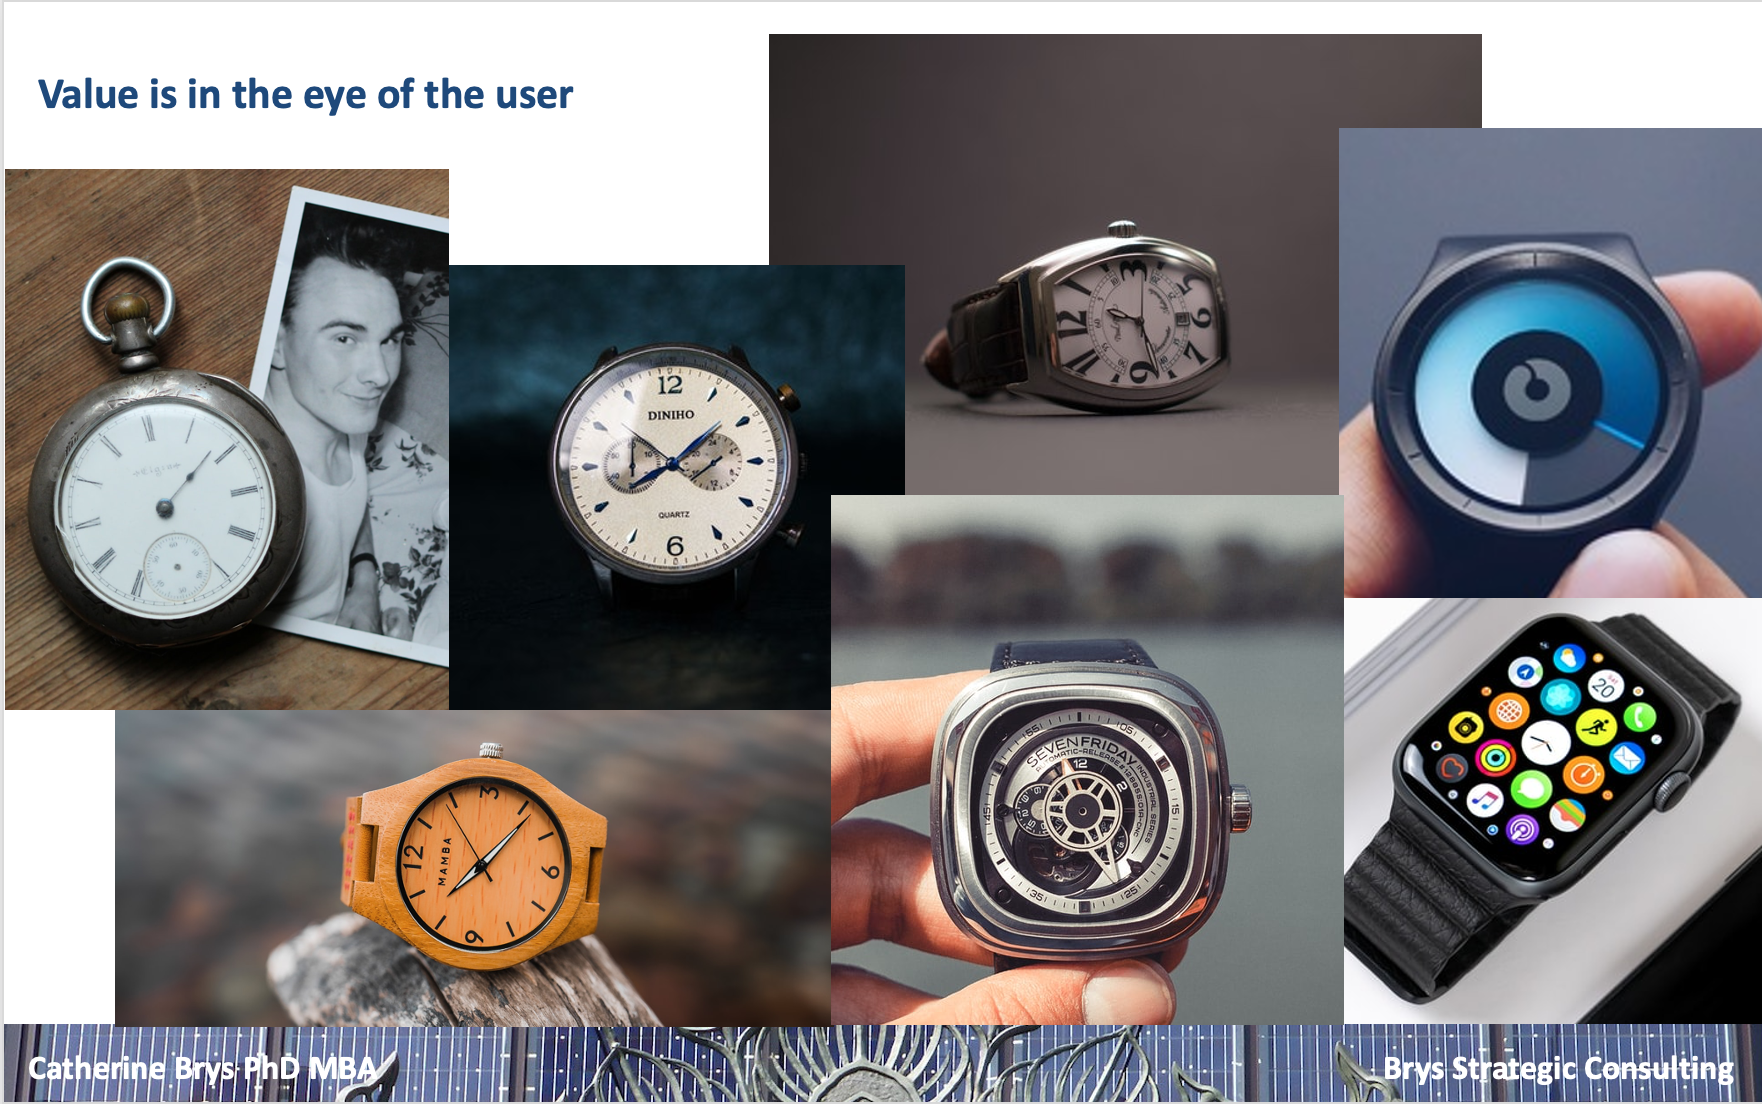 Collage of different types of watches, illustrating that value is in the eye of the service user